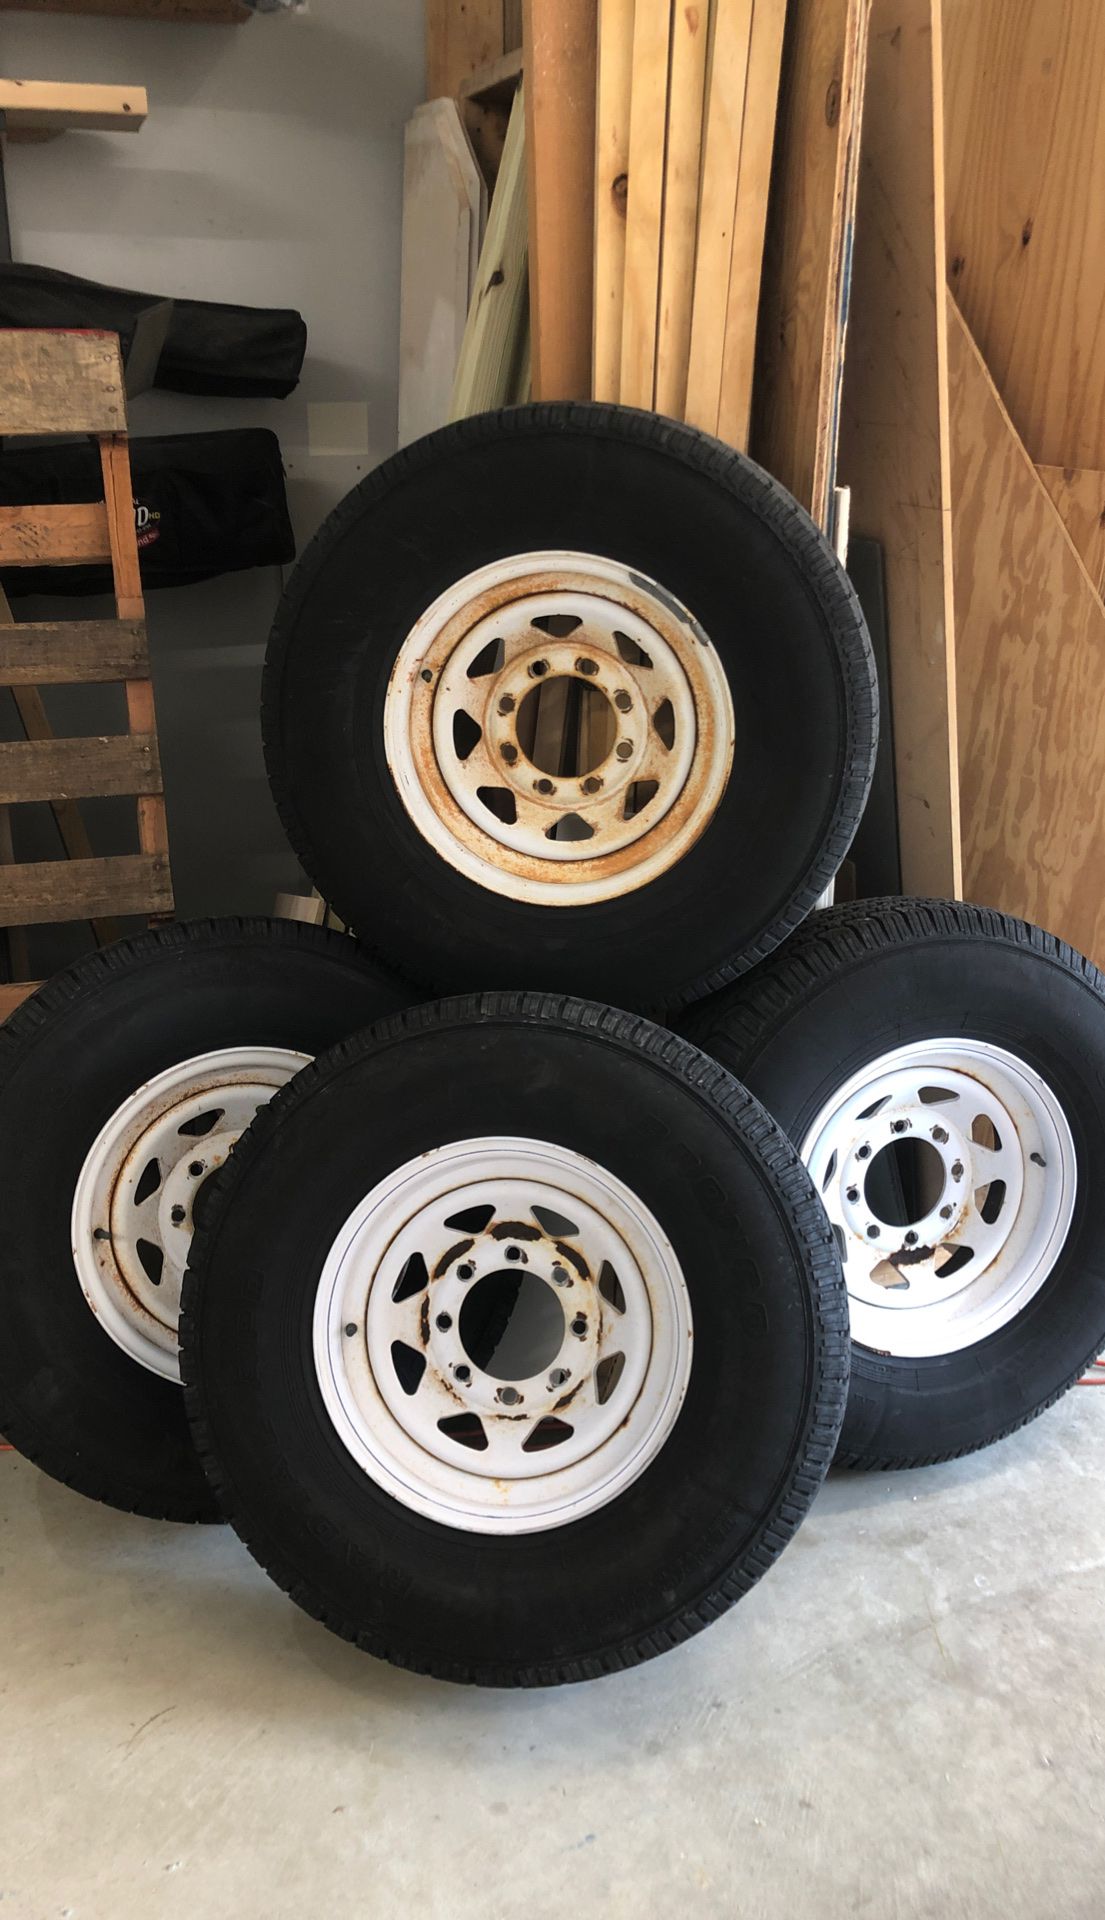 Wheels 8 on 61/2. Tires Bronco 235 85 16. E Load. Old, with extremely low mileage. For trailer only!